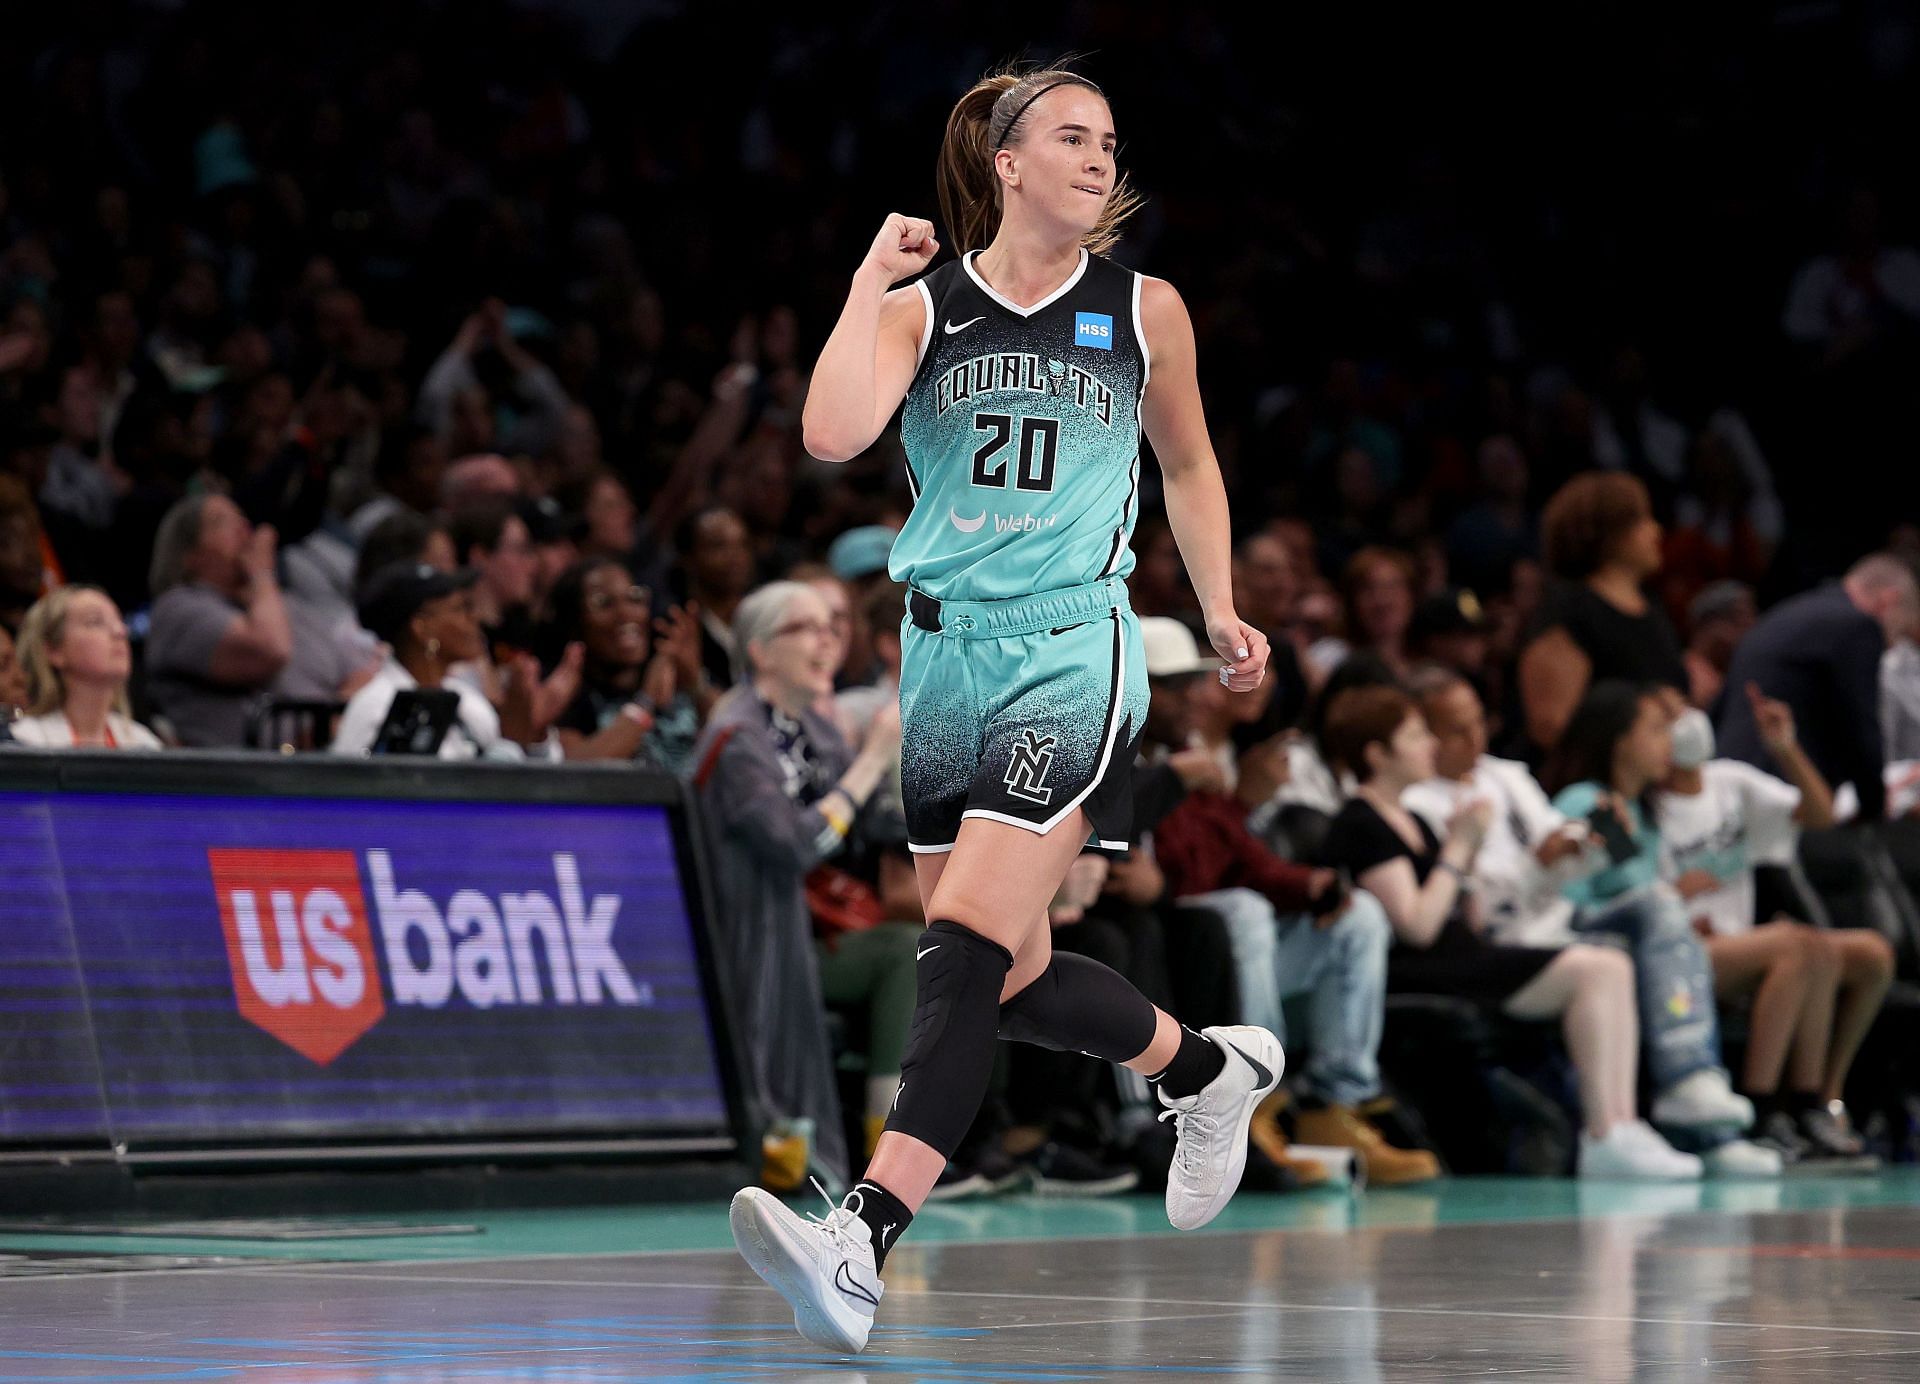 Sabrina Ionescu contract, salary, net worth - did she sign a